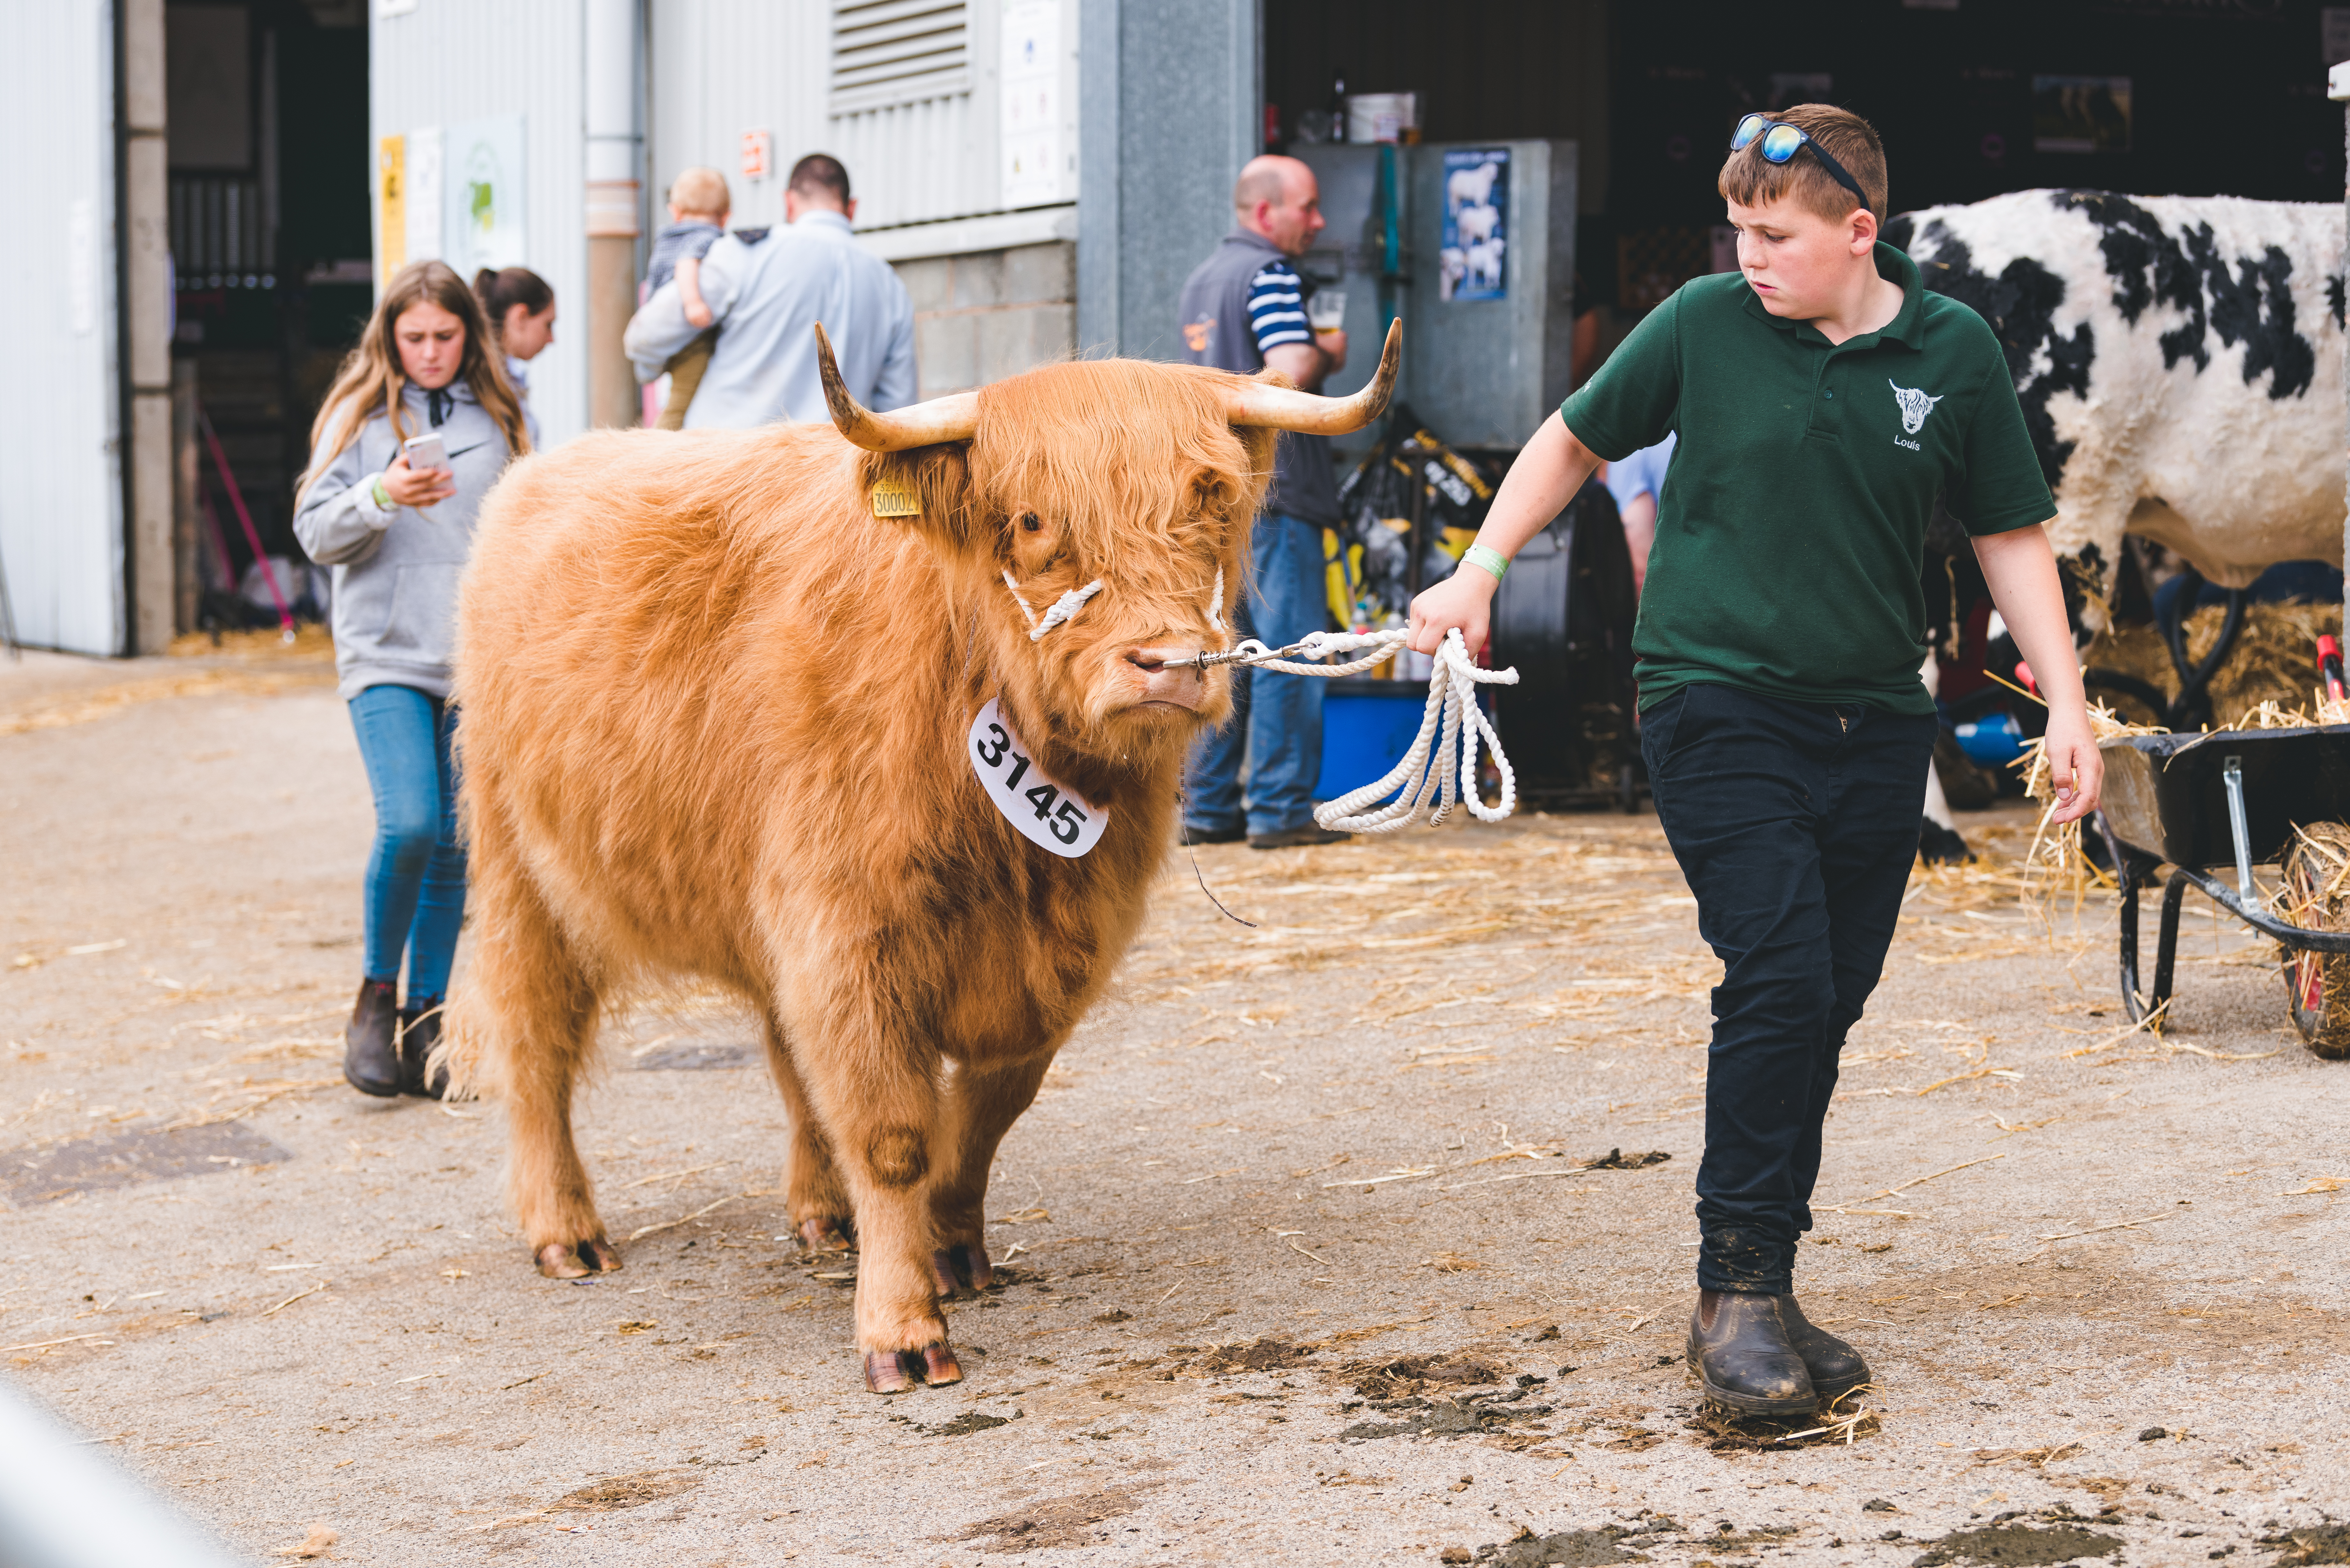 S4C offers more than 40 hours of exclusive multi-platform coverage of the Royal Welsh Show